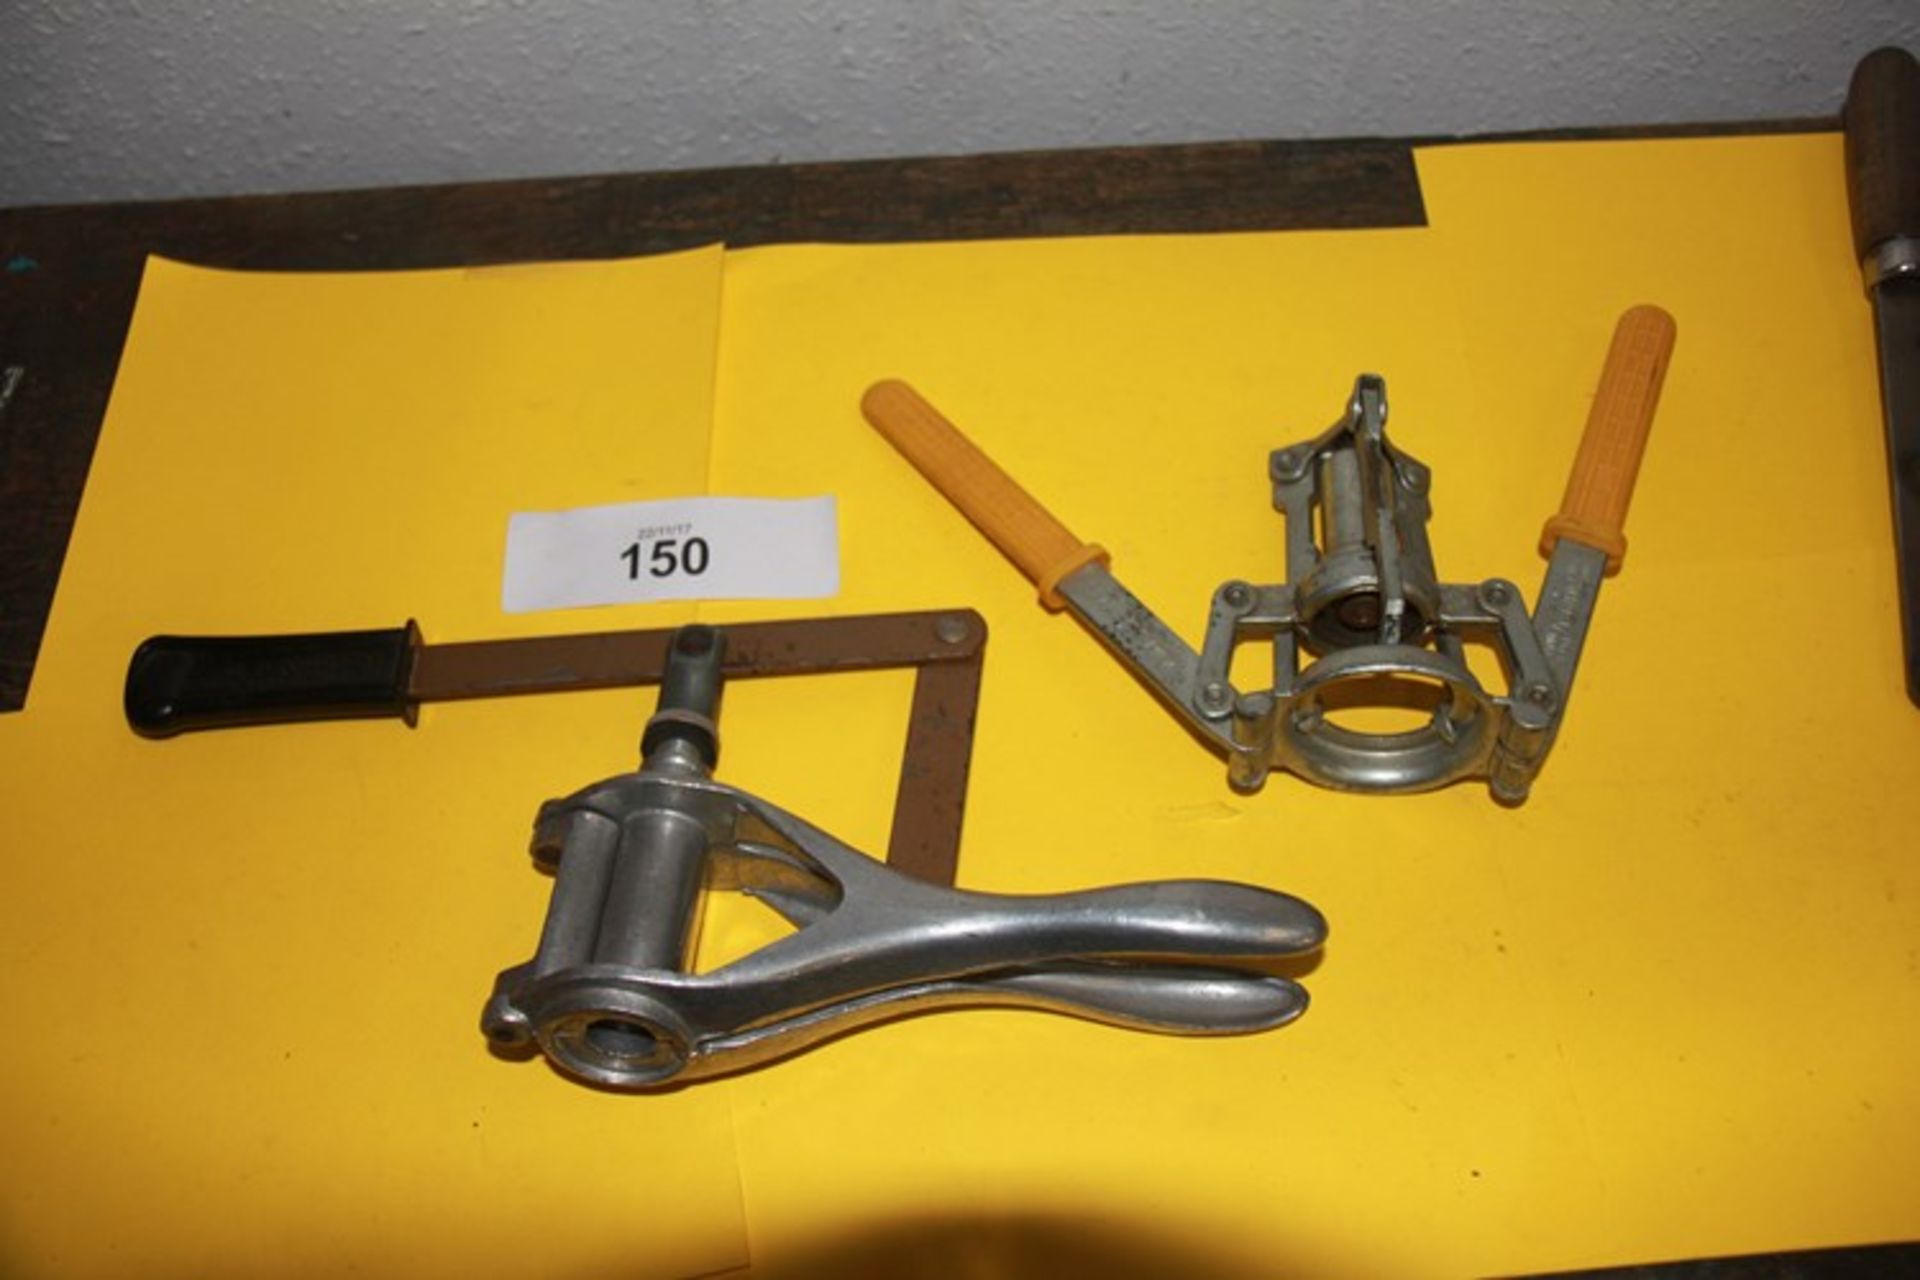 1 x Inart double handled corking machine and 1 x Sanbri double handled corking machine - Both modern